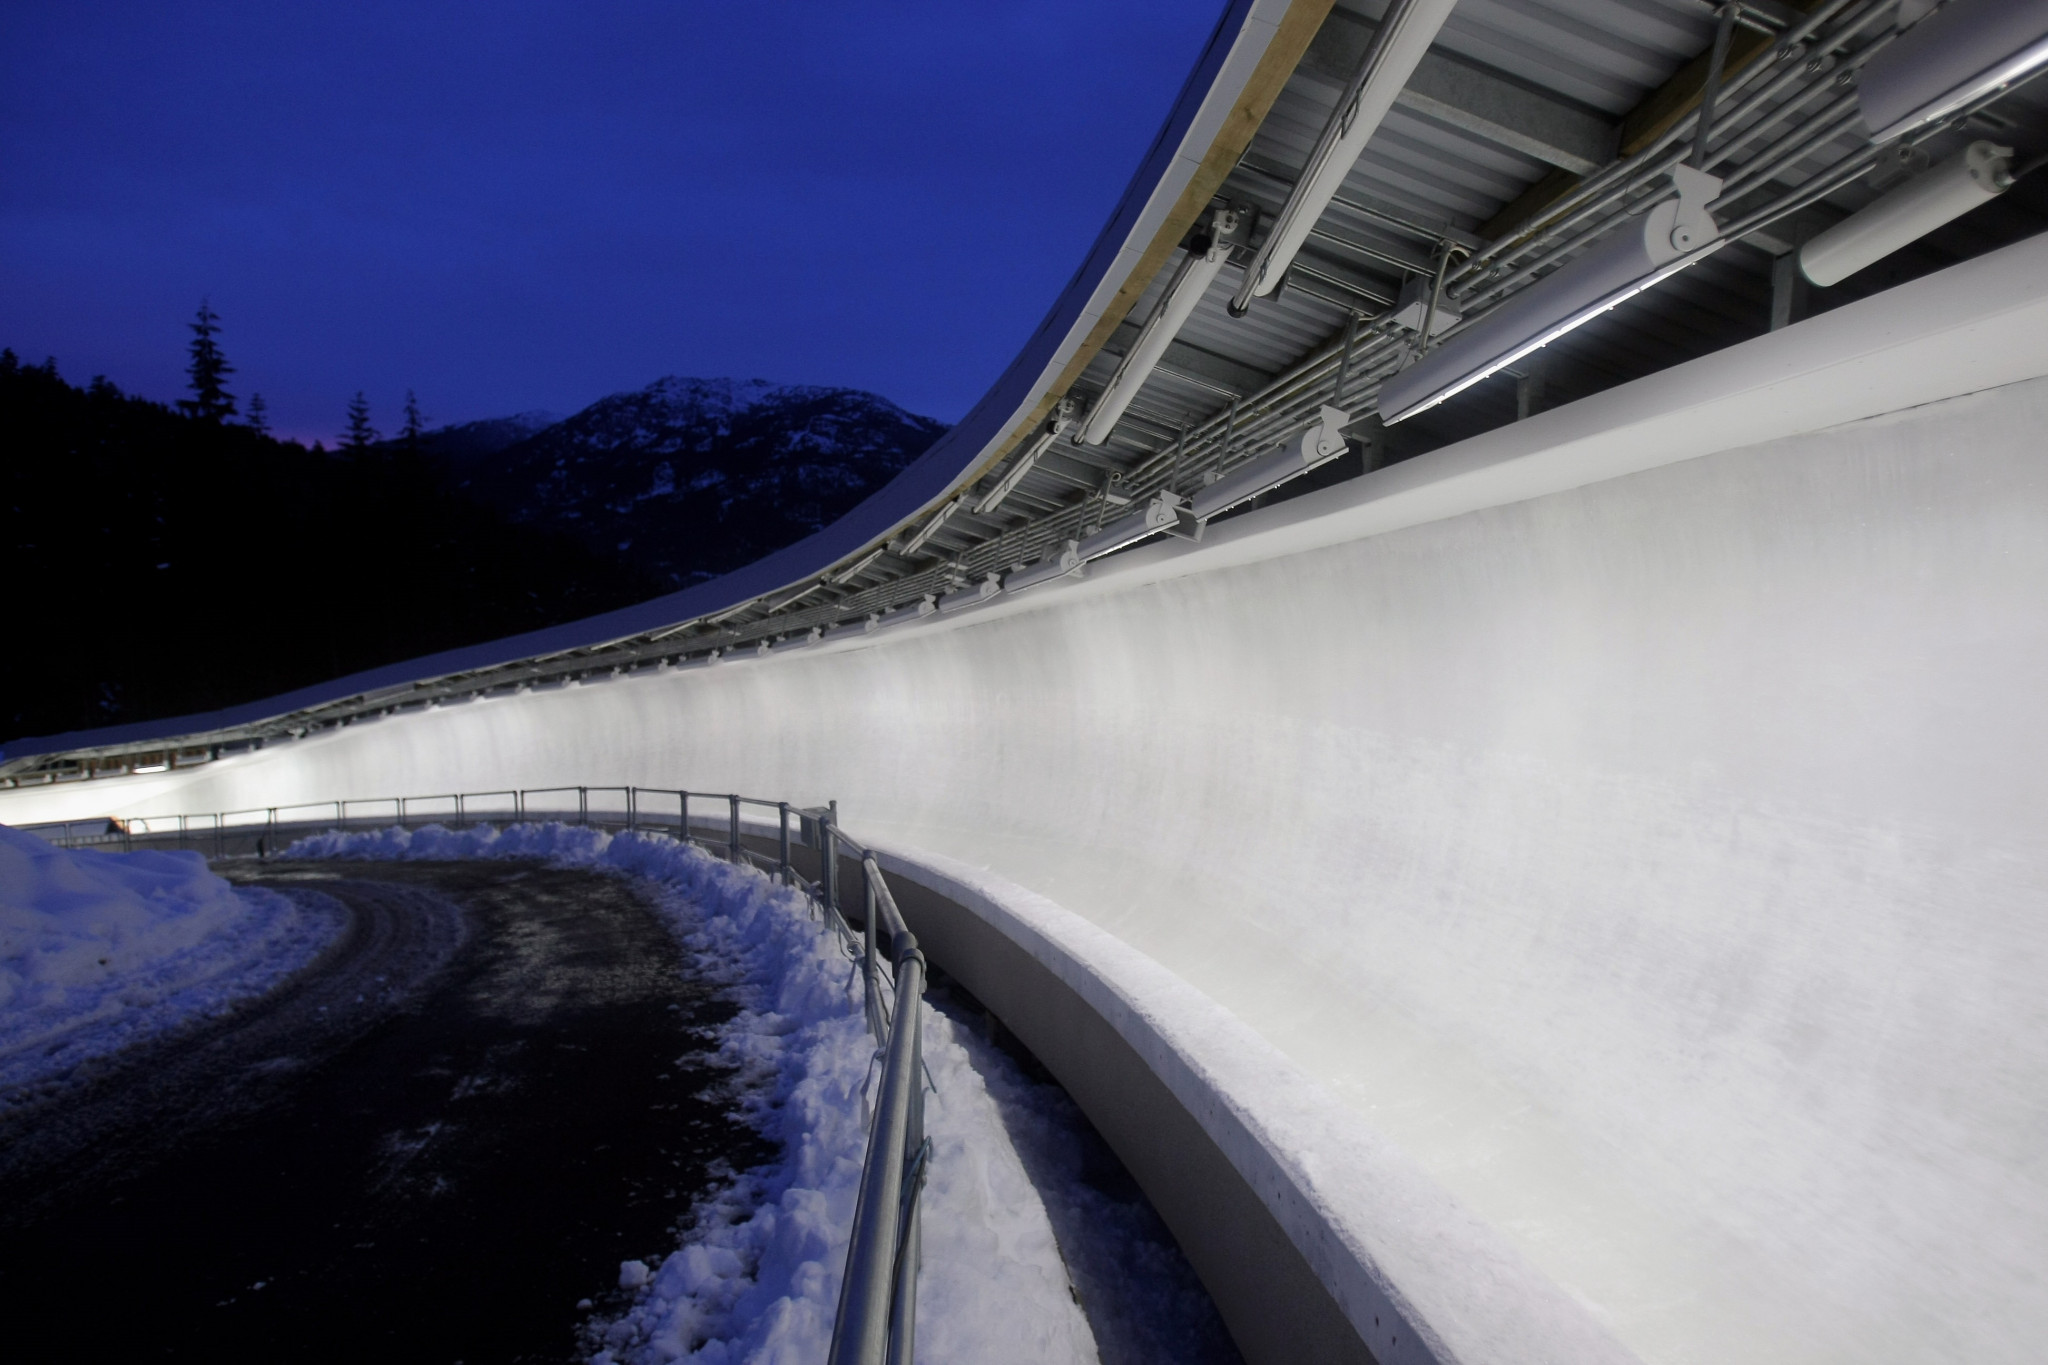 IBSF World Cup set to return with curtain-raiser at Whistler Sliding Centre